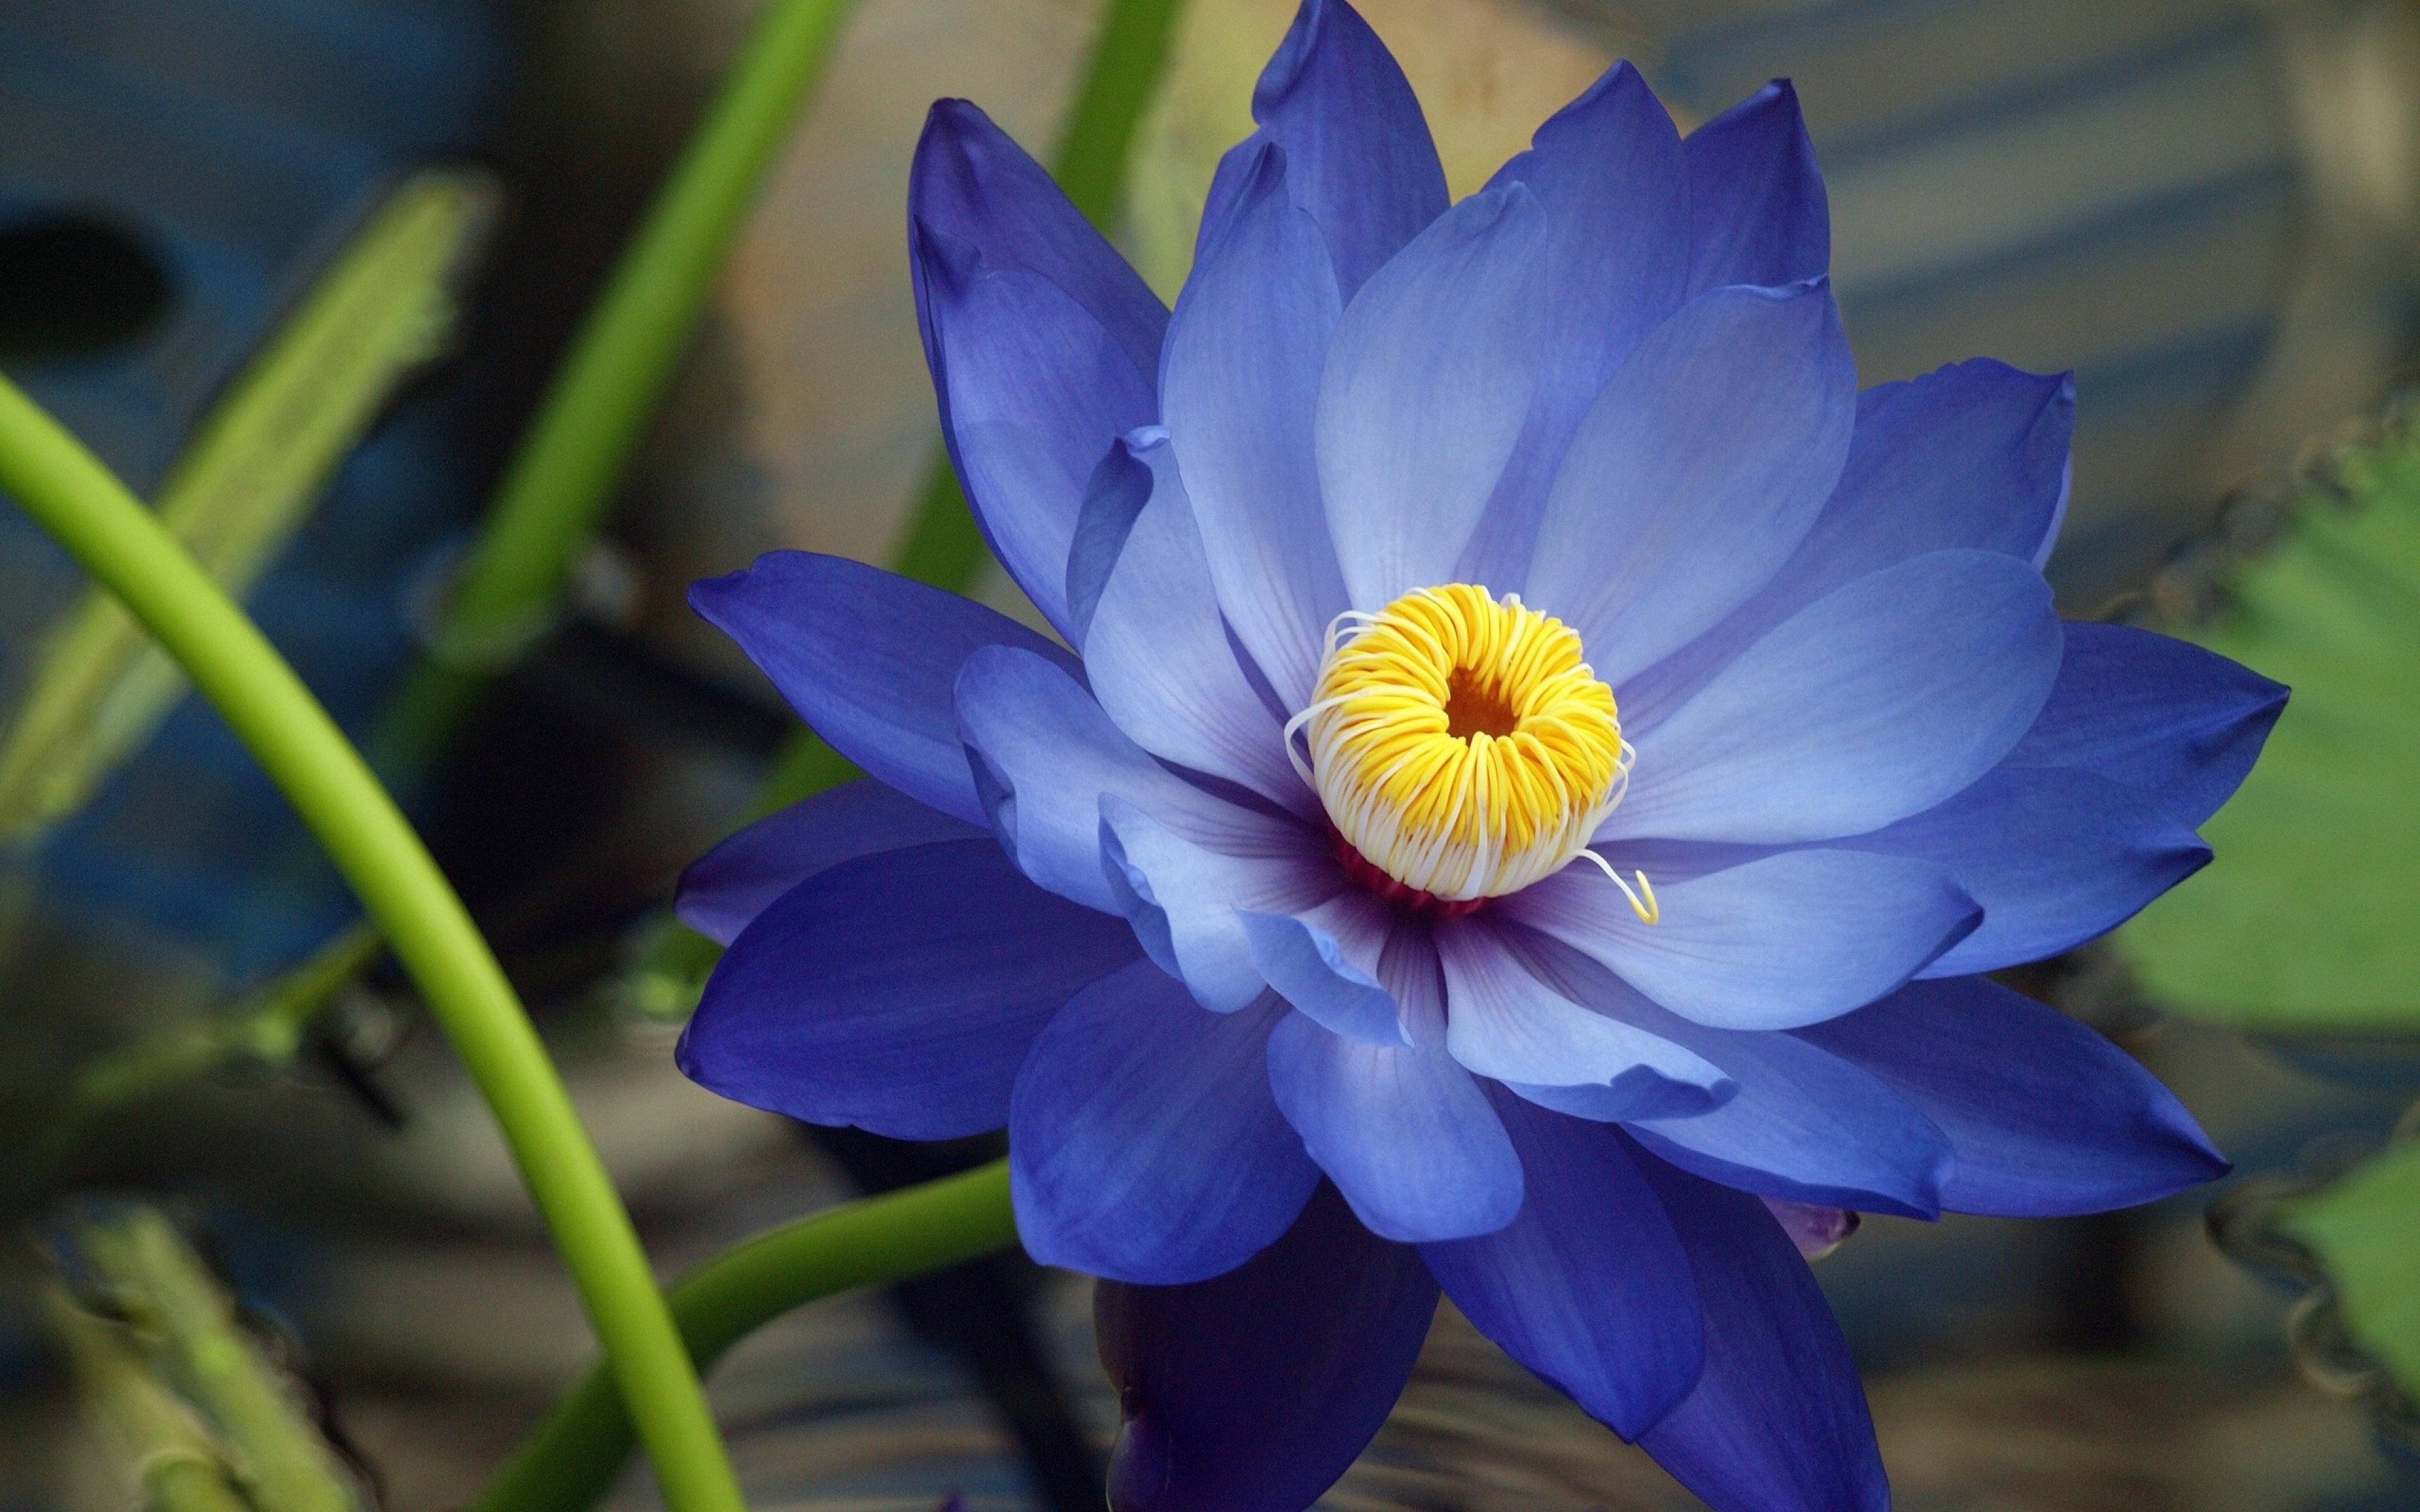 Blue Lotus Flower Meaning and Symbolism